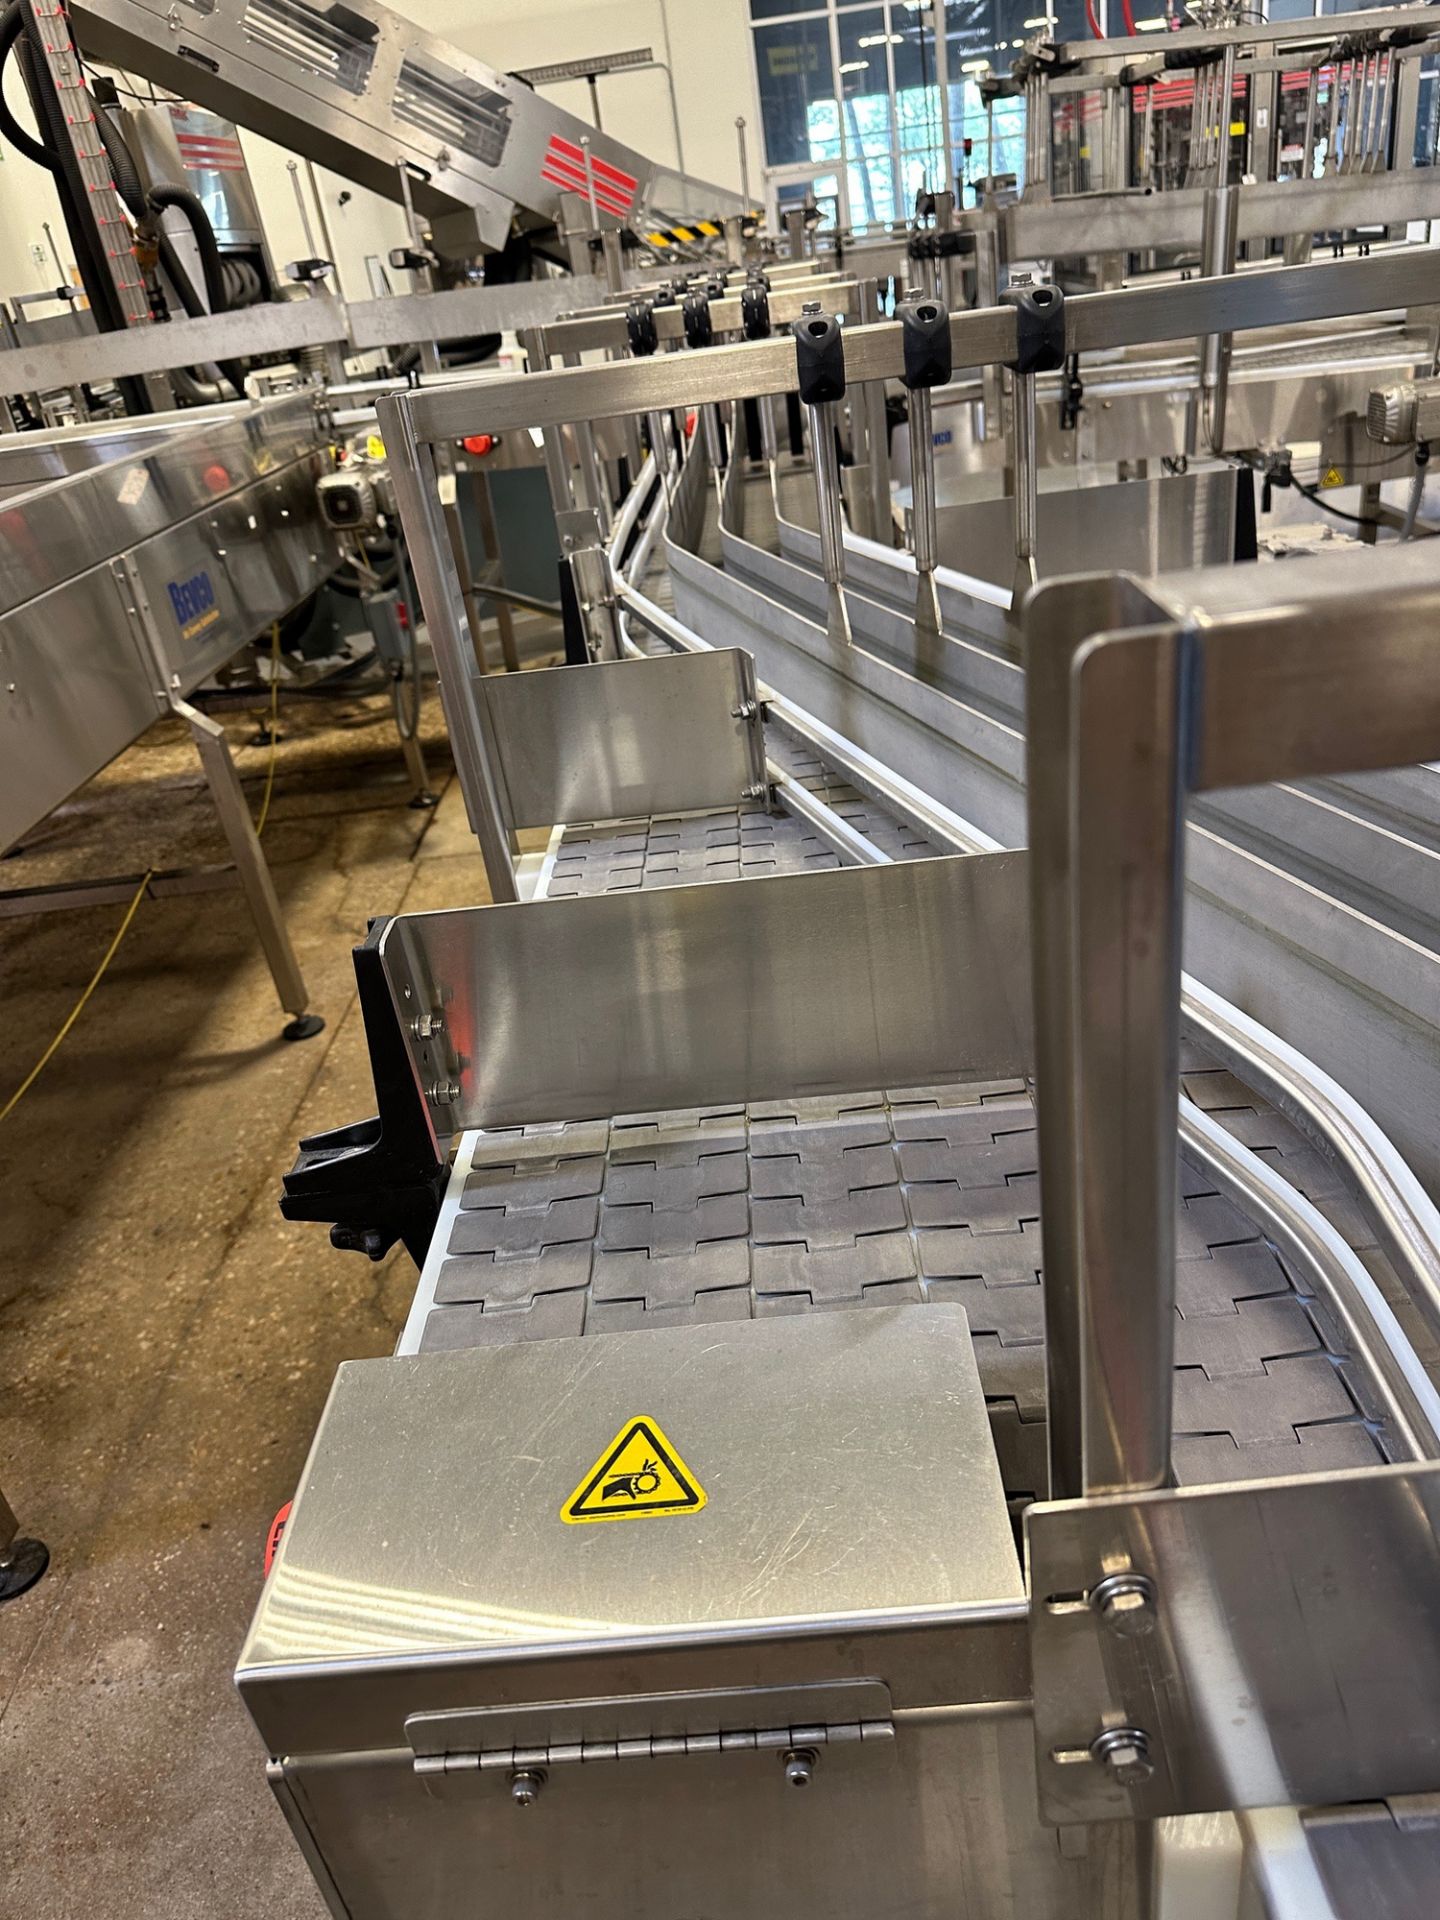 Bevco Conveyor over Stainless Steel Frame (Approx. (4) 3.25" Belts x 16' with 90 Degree Turn) - Image 3 of 4